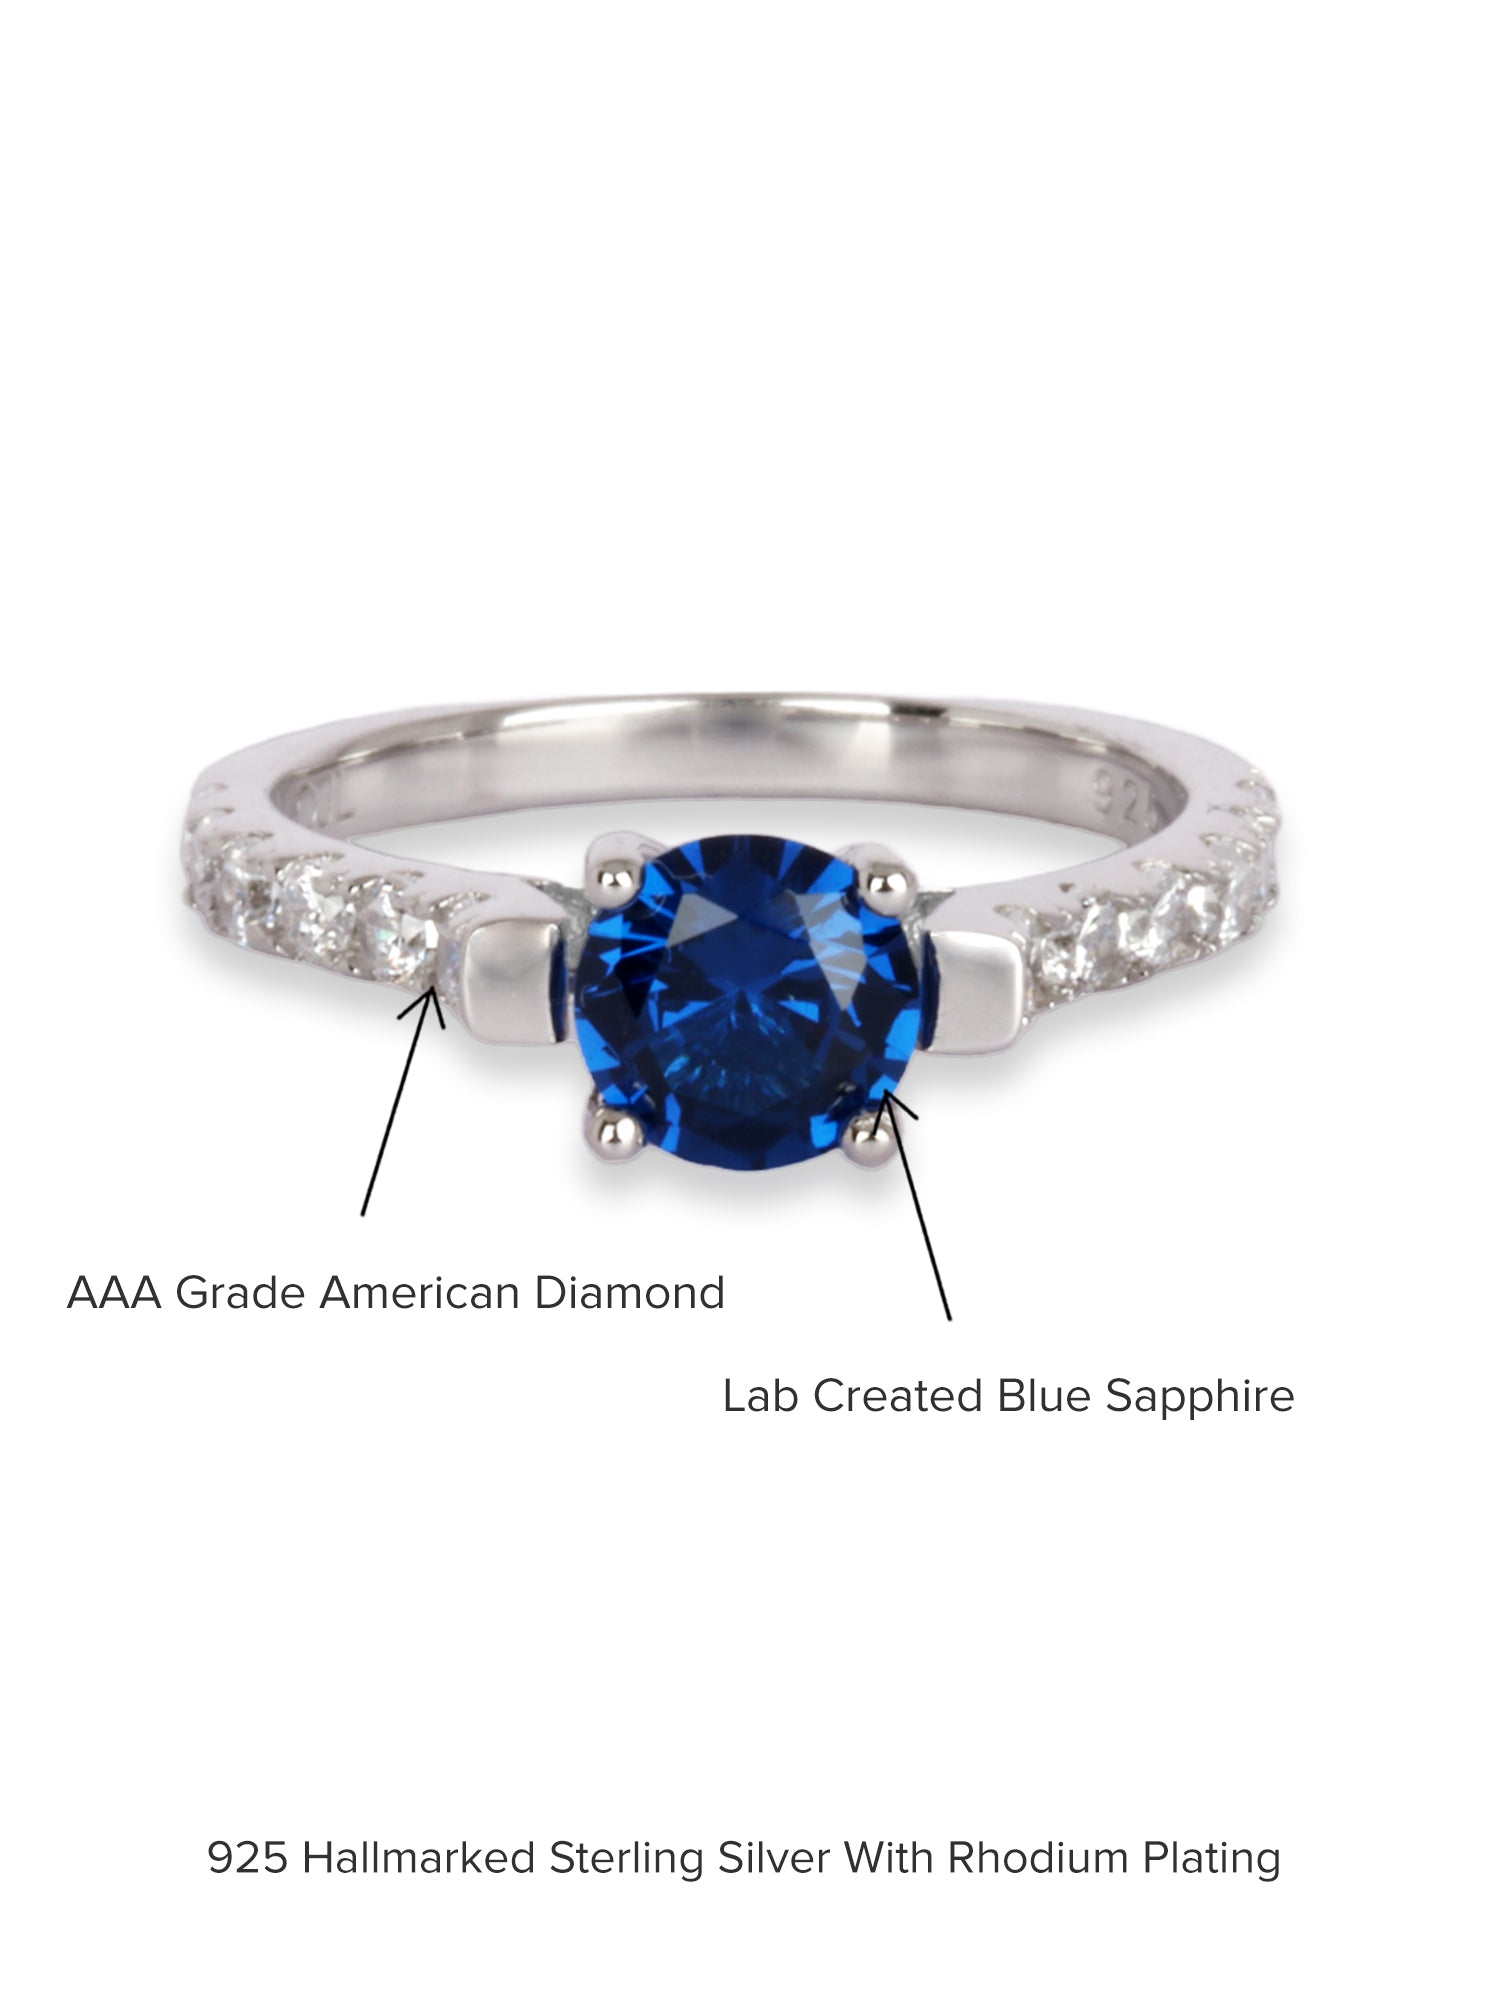 ORNATE JEWELS BLUE SAPPHIRE SOLITAIRE SILVER RING FOR WOMEN-6